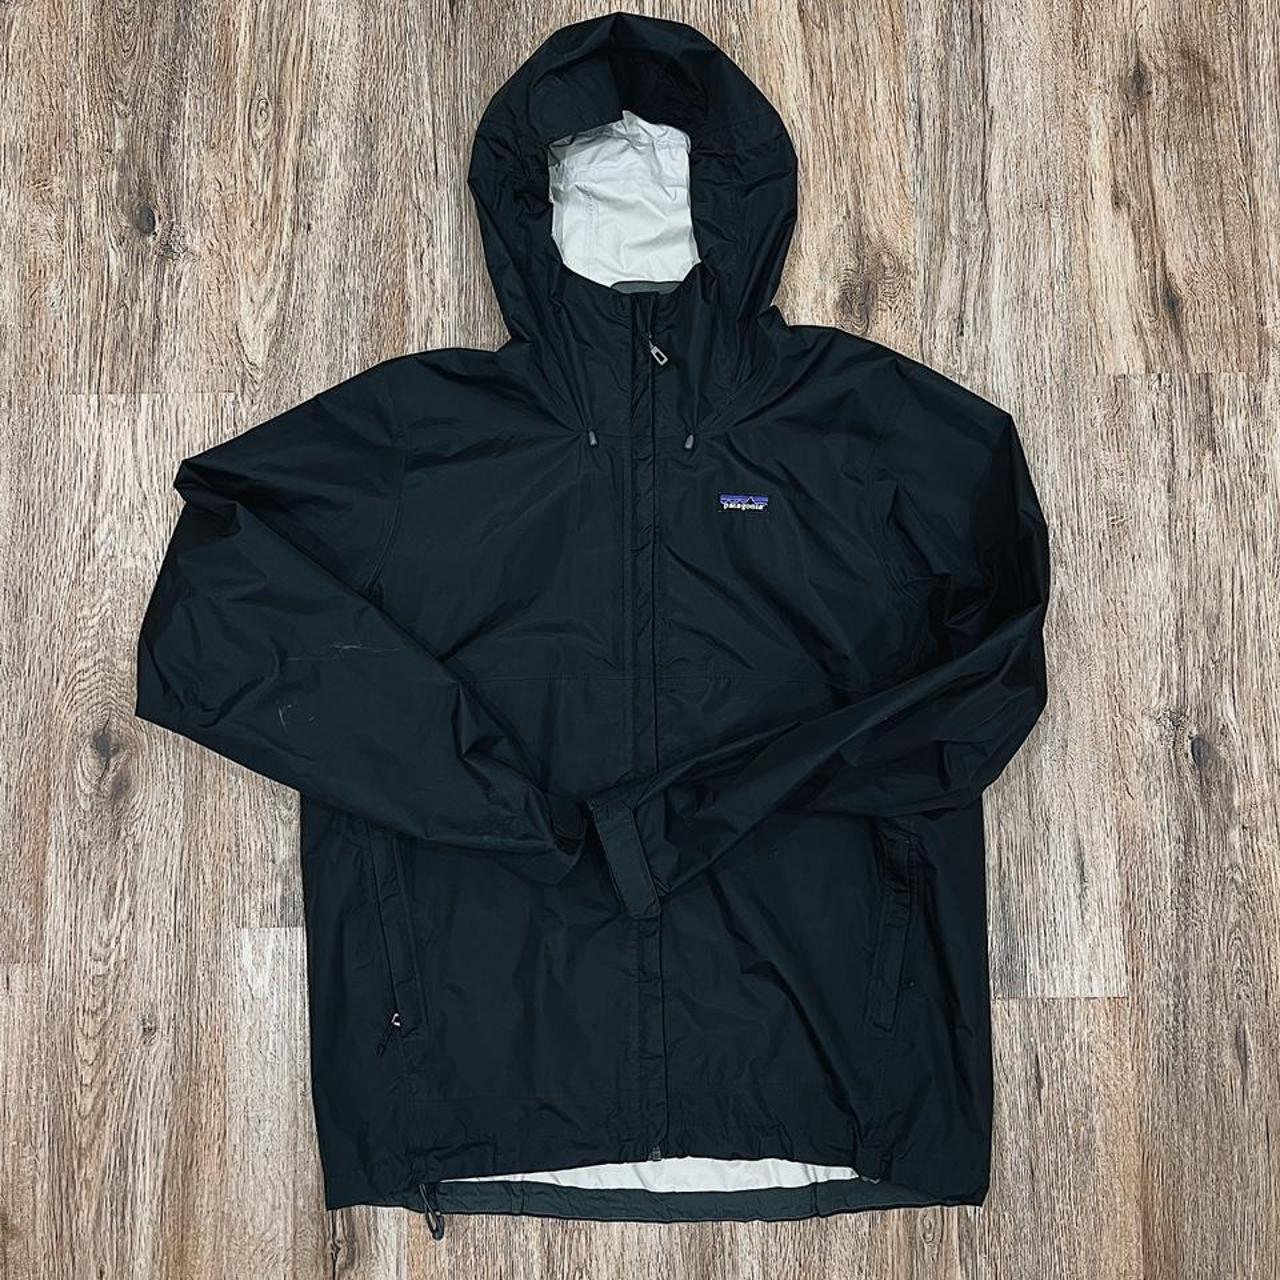 PATAGONIA OUTERSHELL - Perfect for tech-wear,... - Depop